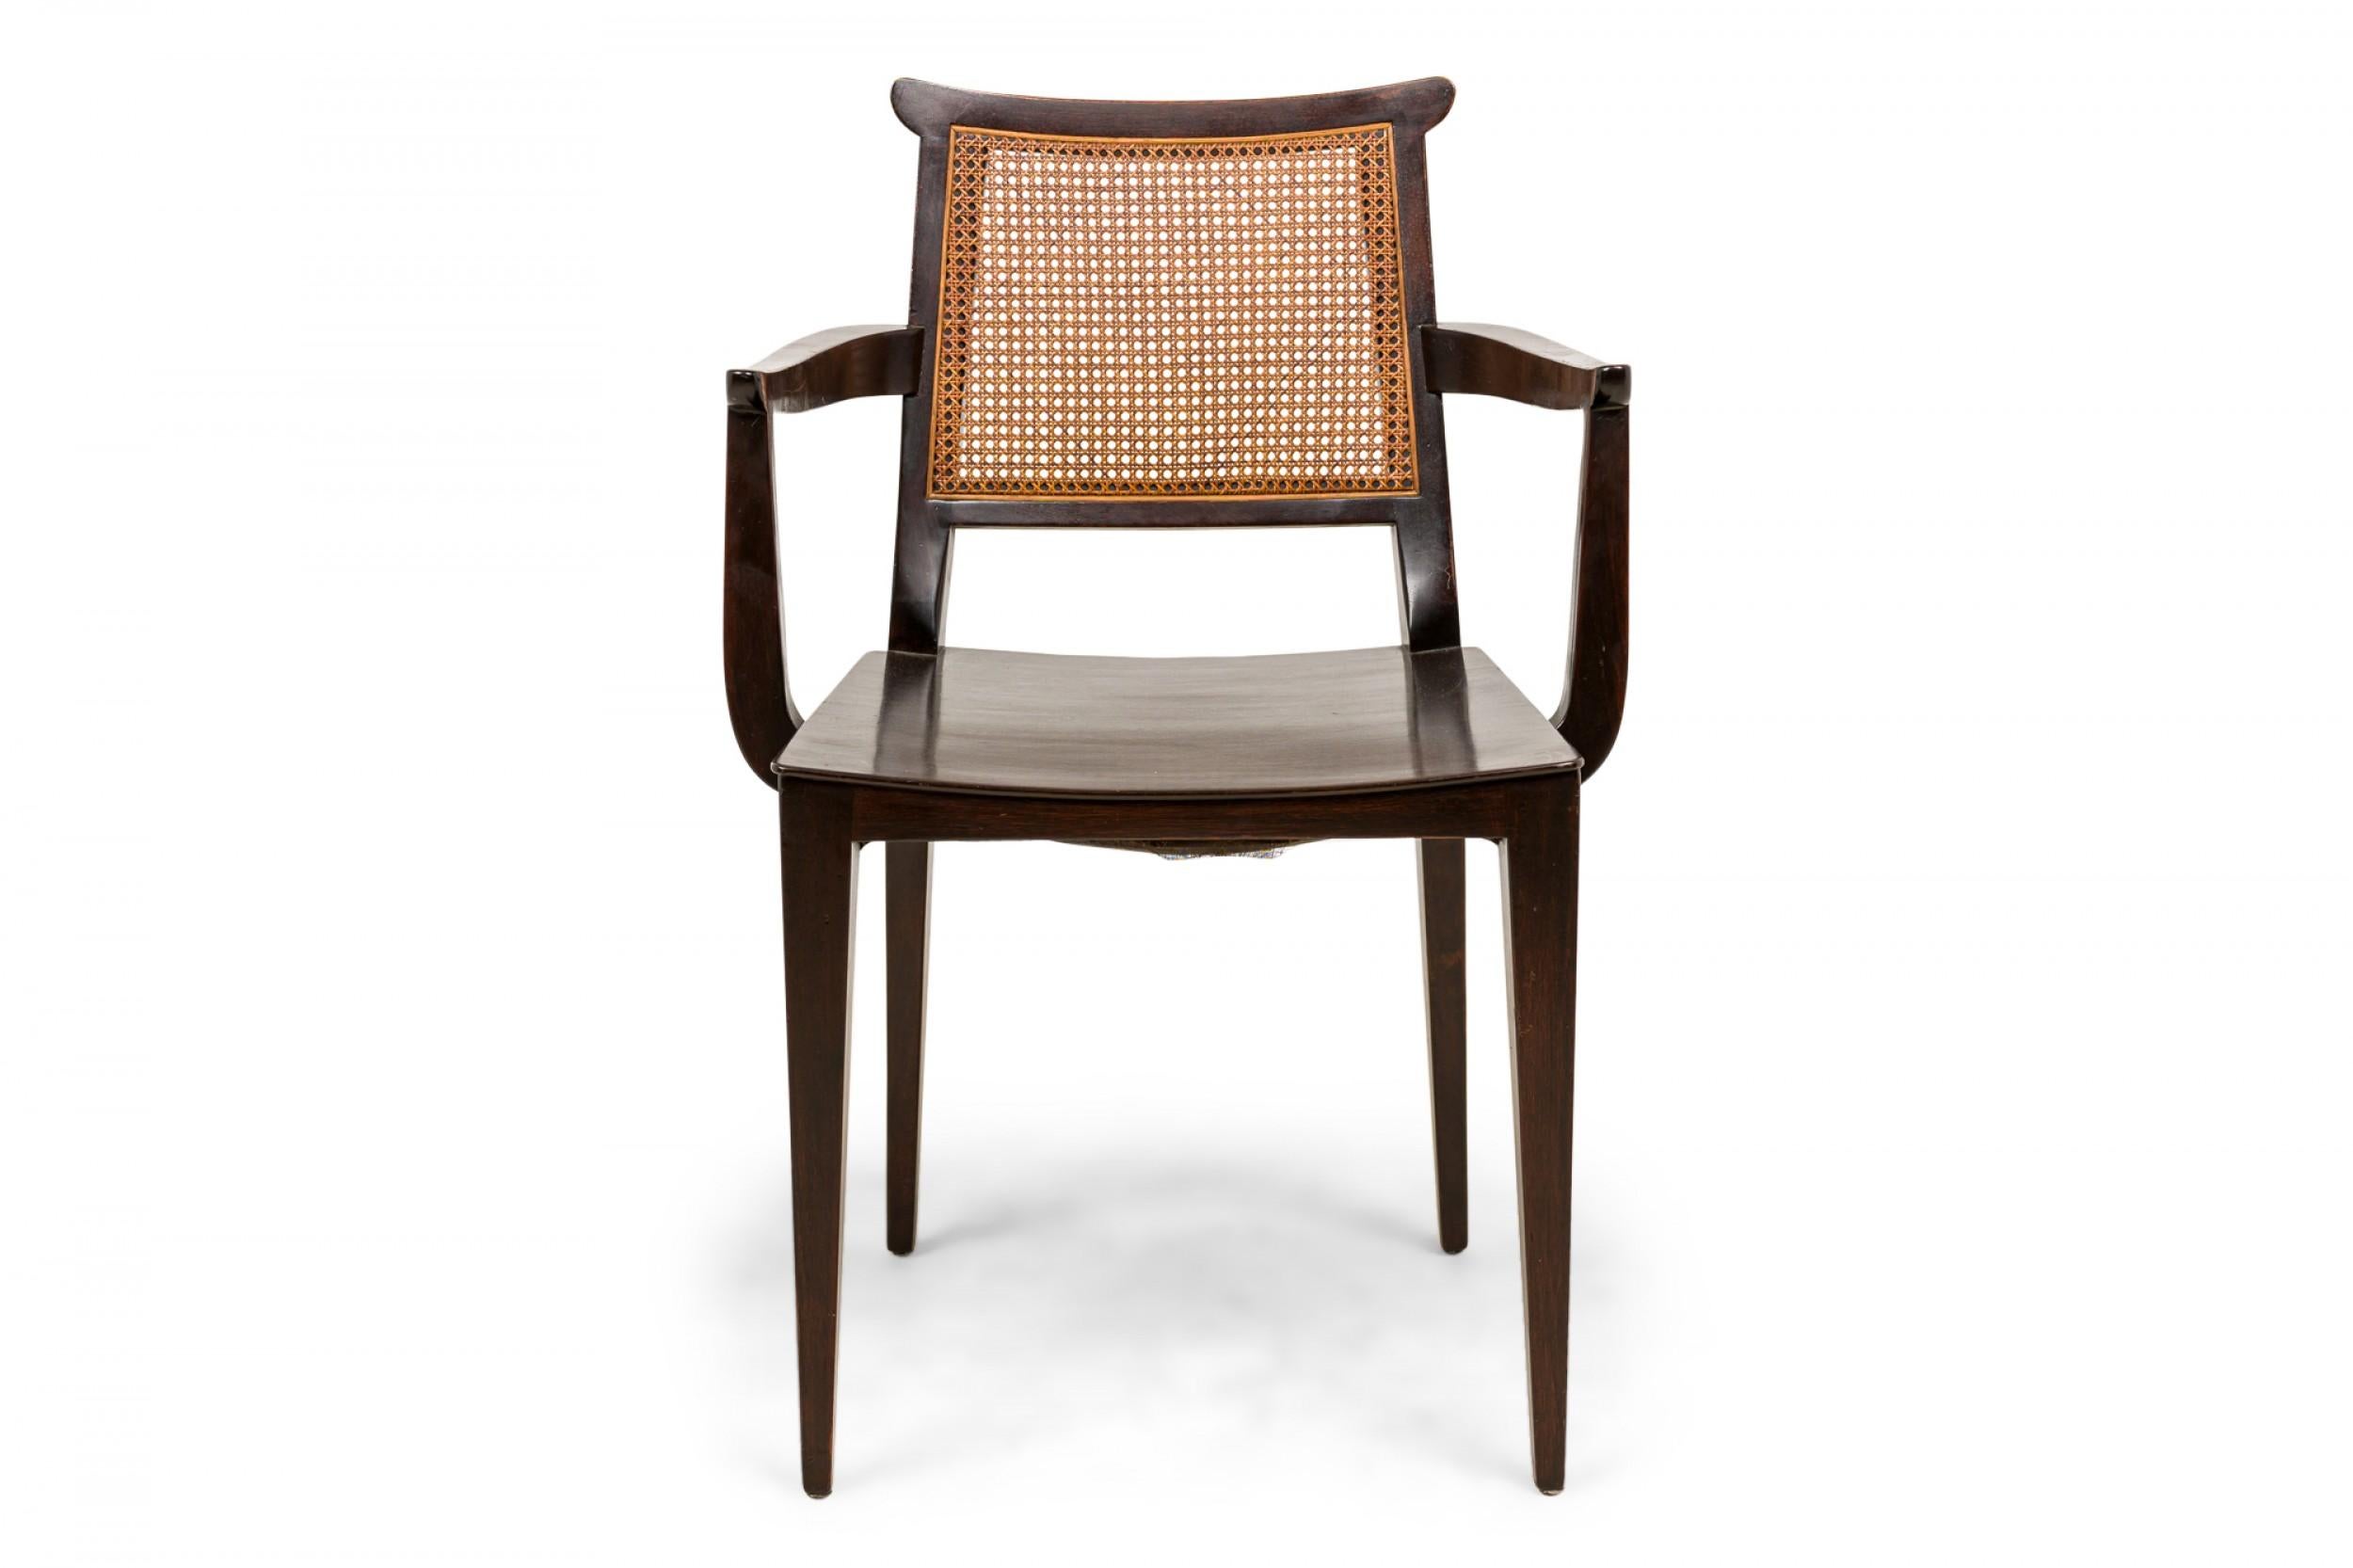 SET of 4 American Mid-Century dining armchairs with dark stained wooden frames, solid wooden seats, and caned backs. (EDWARD WORMLEY FOR DUNBAR FURNITURE COMPANY)(PRICED AS SET)
